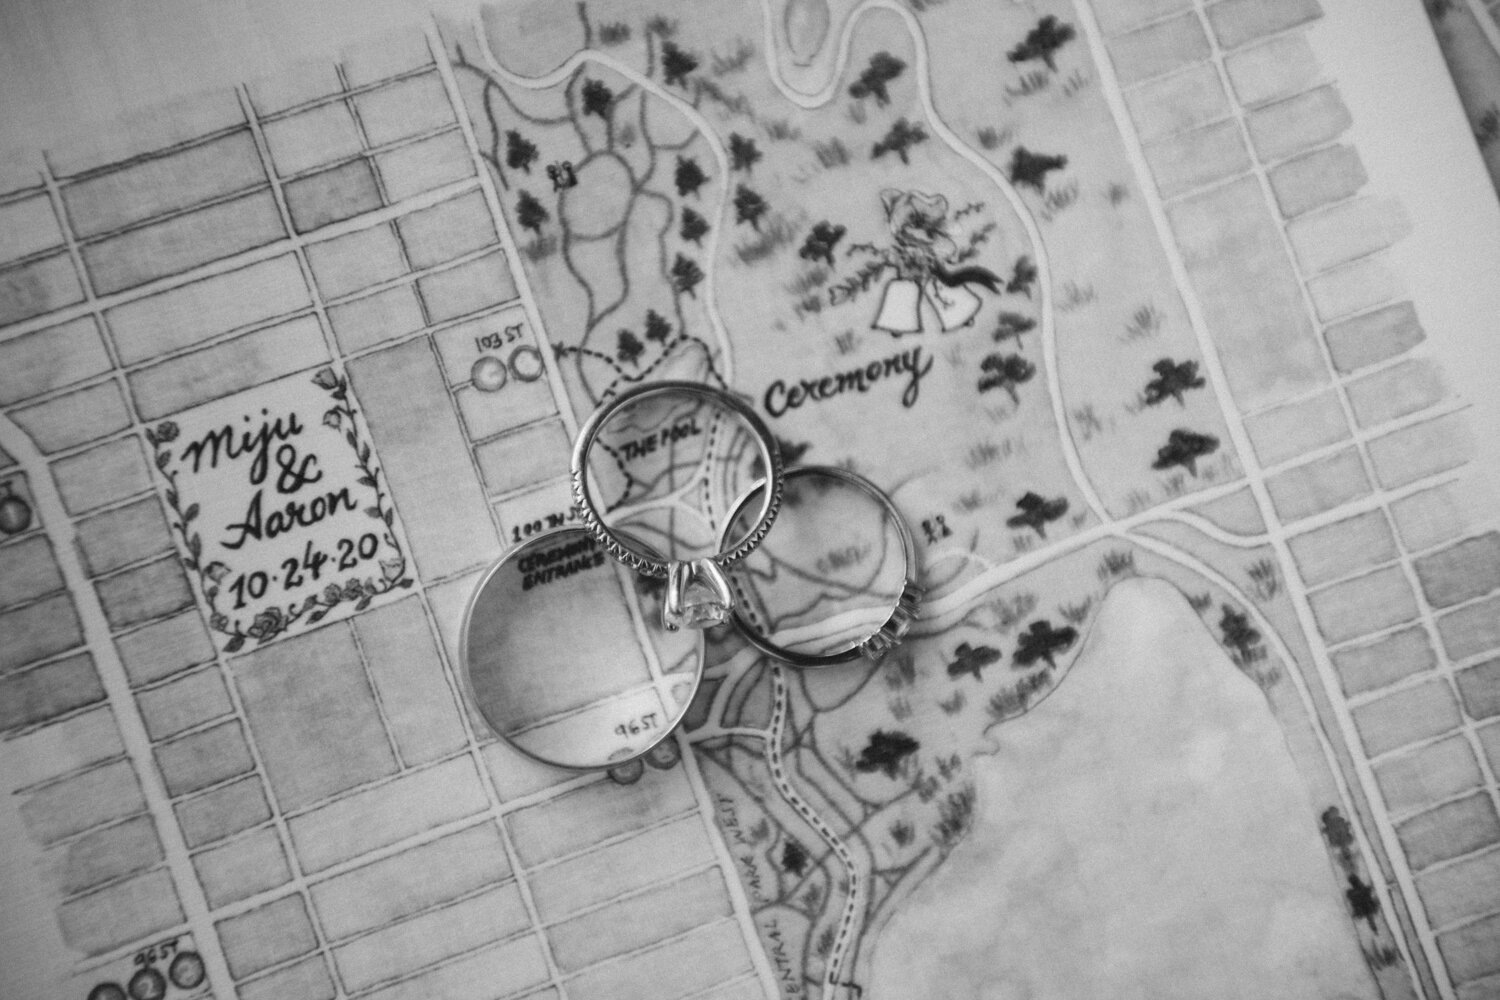 Close-up image of the wedding rings and engagement ring sitting on top of a map of Central Park with marked locations for the ceremony.

Central Park Wedding Photography. Williamsburg Bridge Bridal Portraits. Luxury NYC Wedding Photographer. Manhattan Micro Wedding.